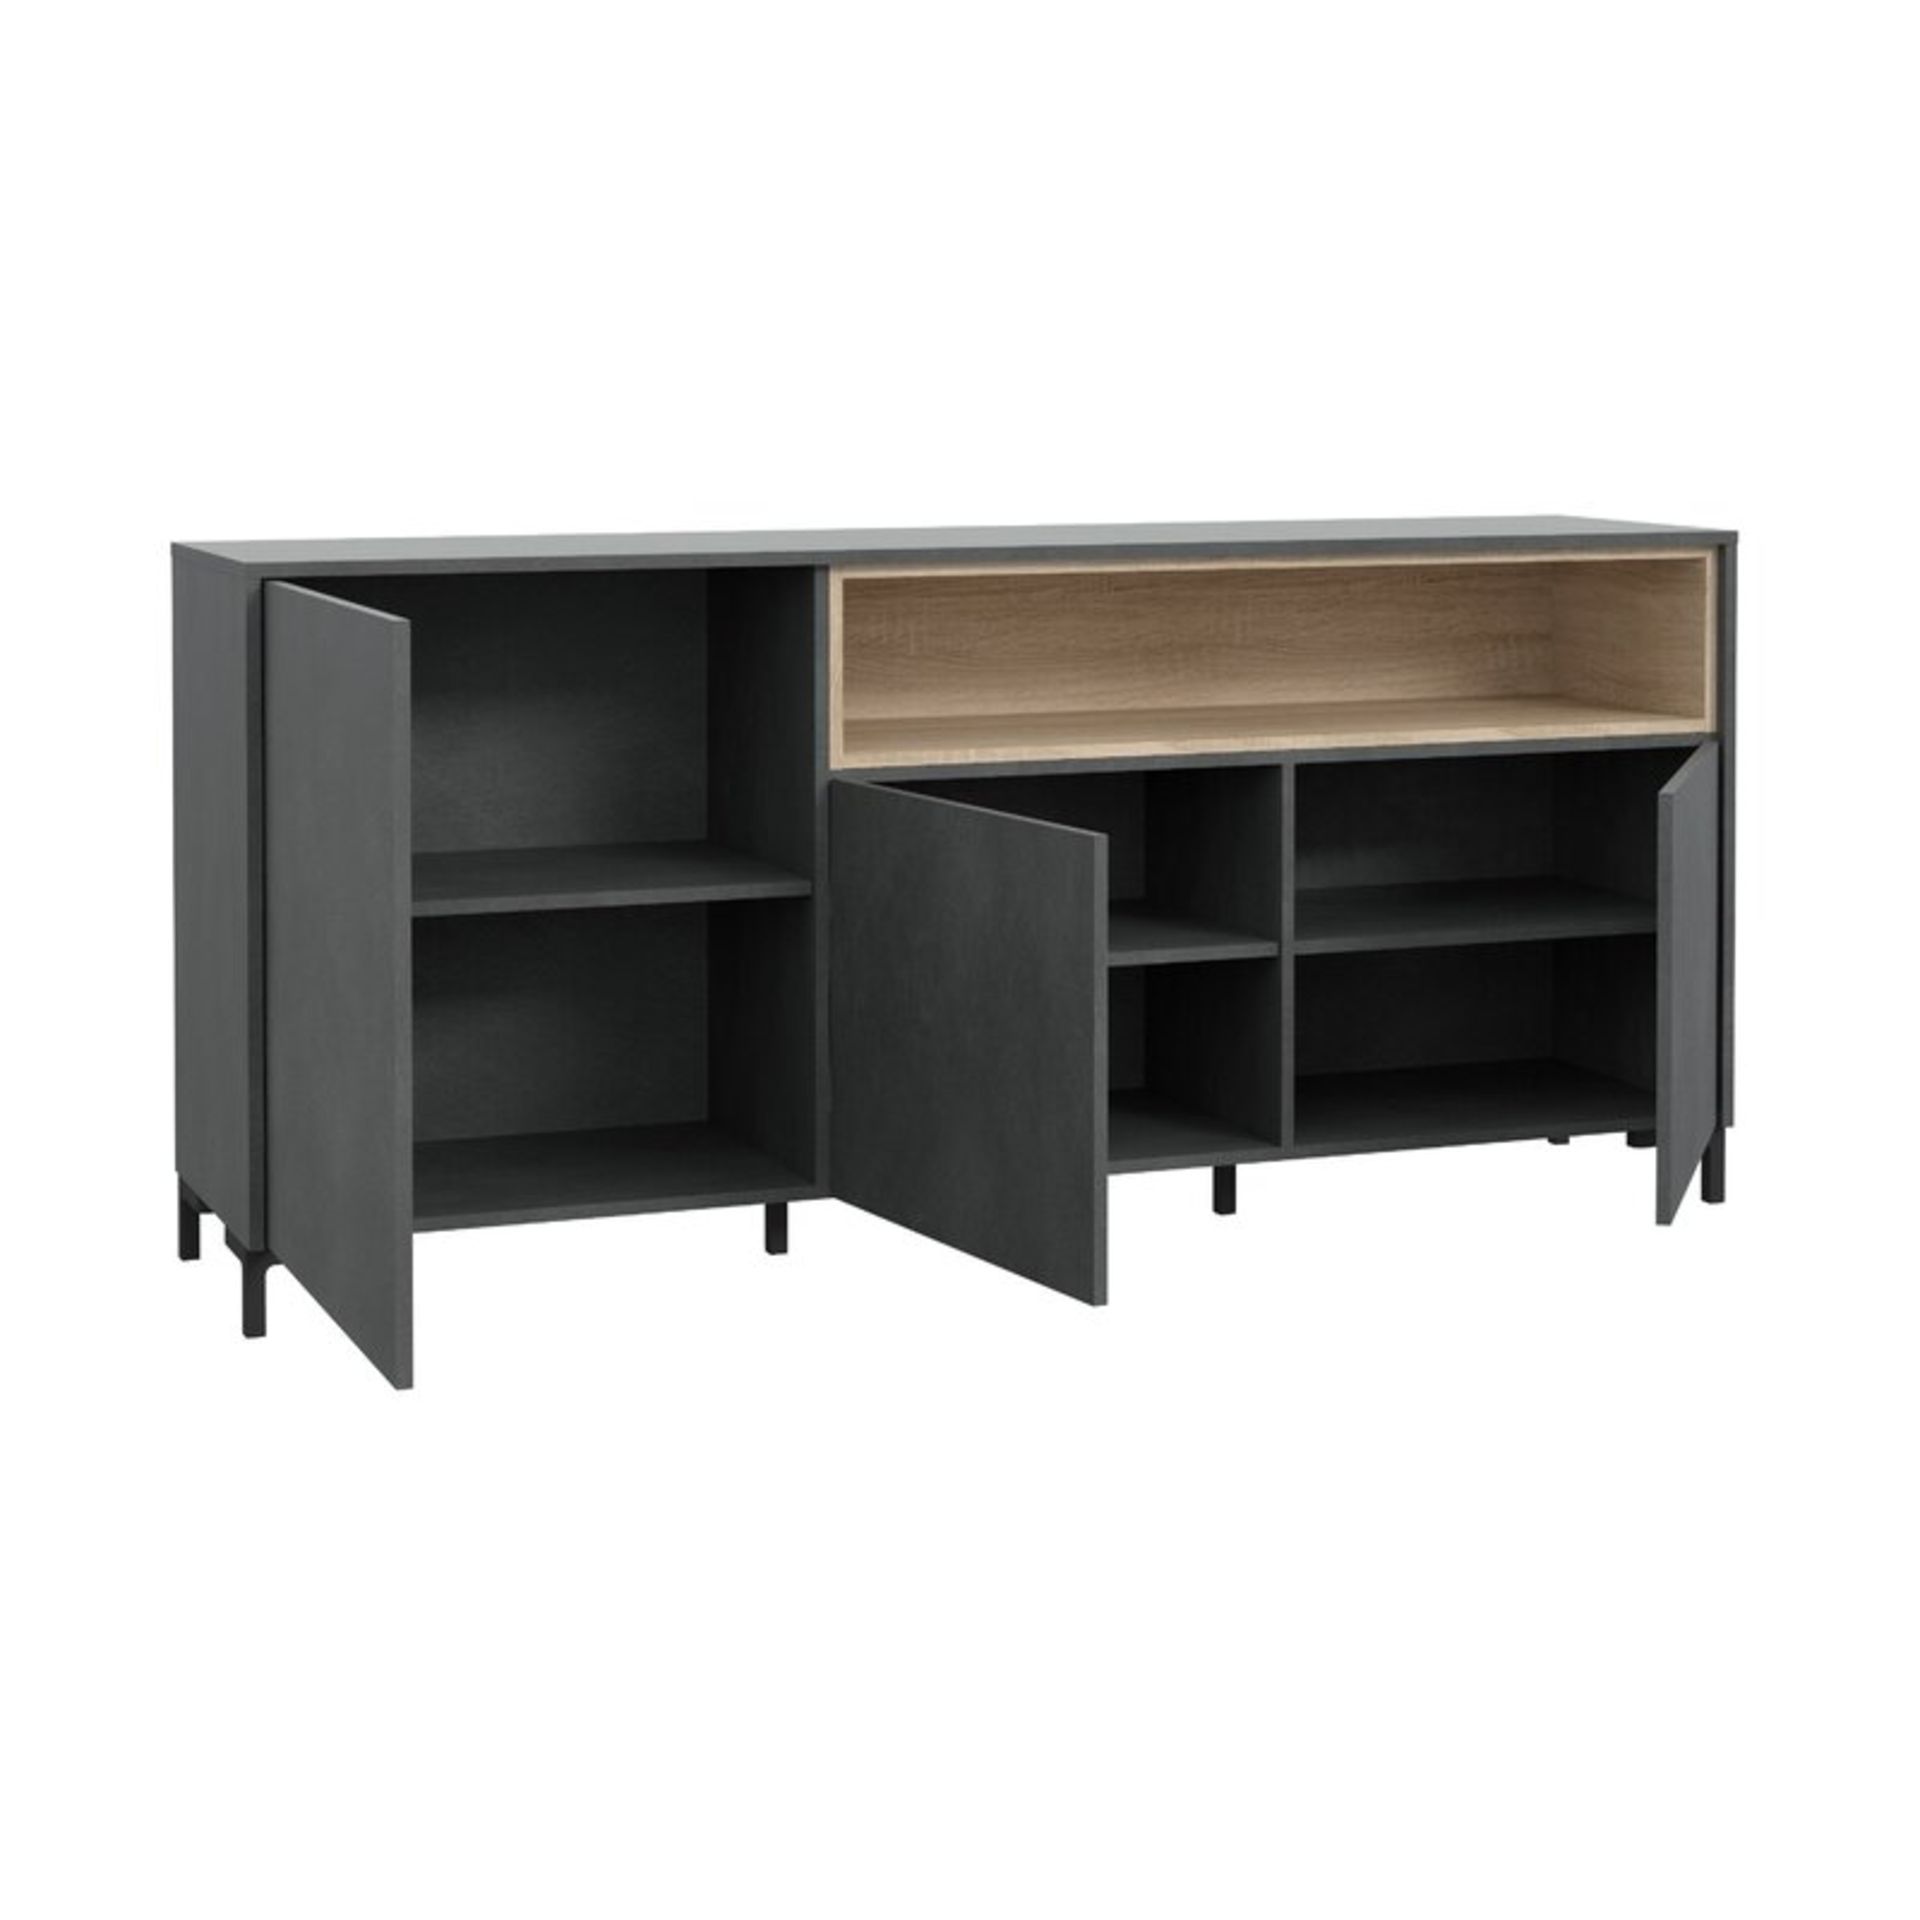 Galactique 173Cm Wide Sideboard RRP £214.99 - Image 2 of 2